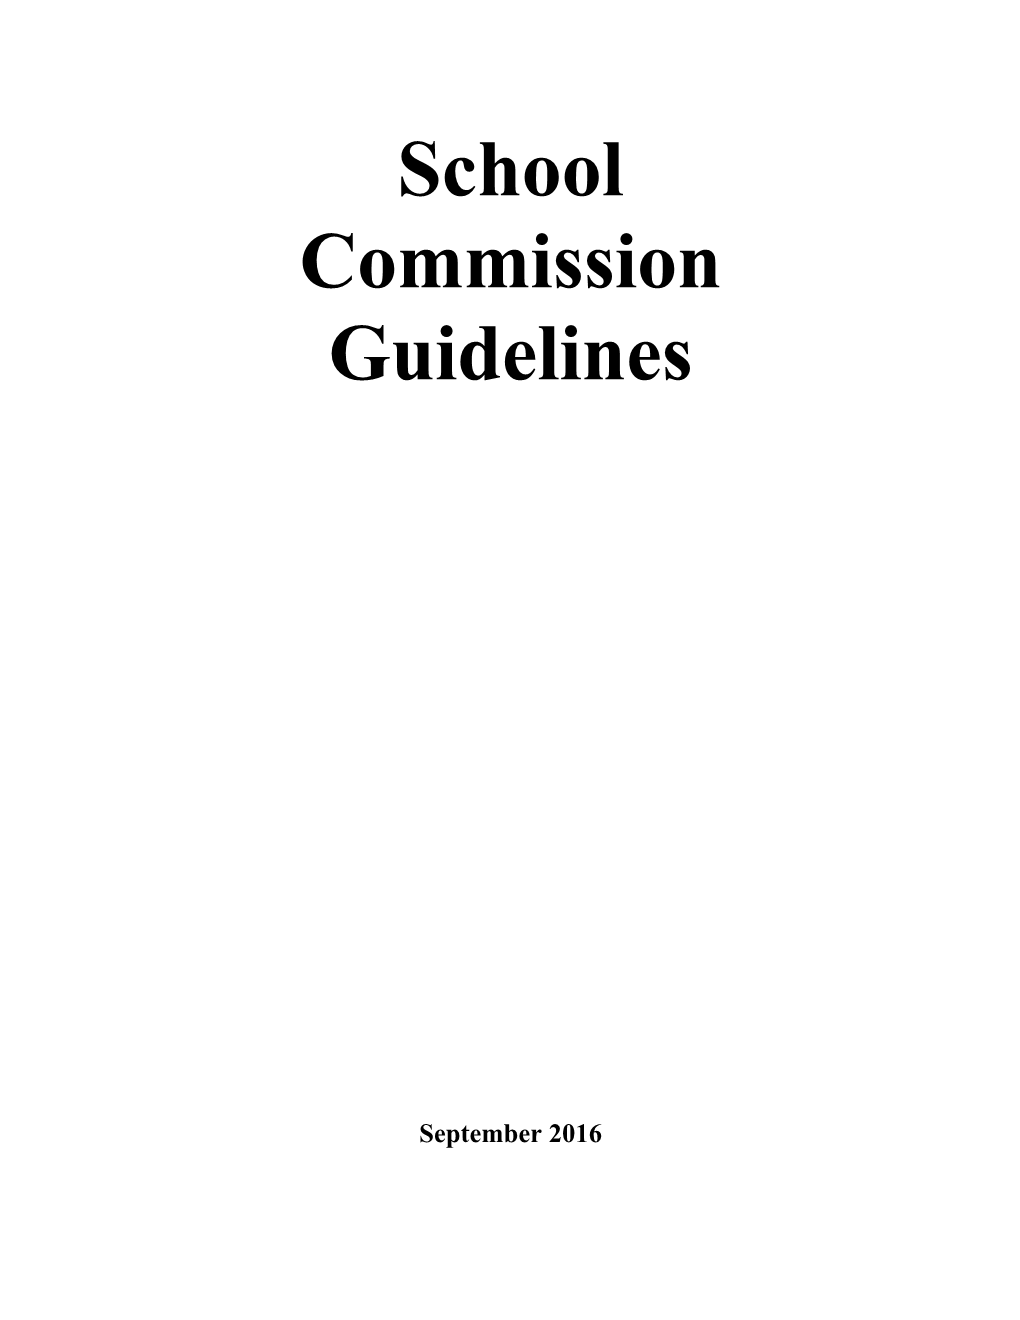 School Commission Guidelines